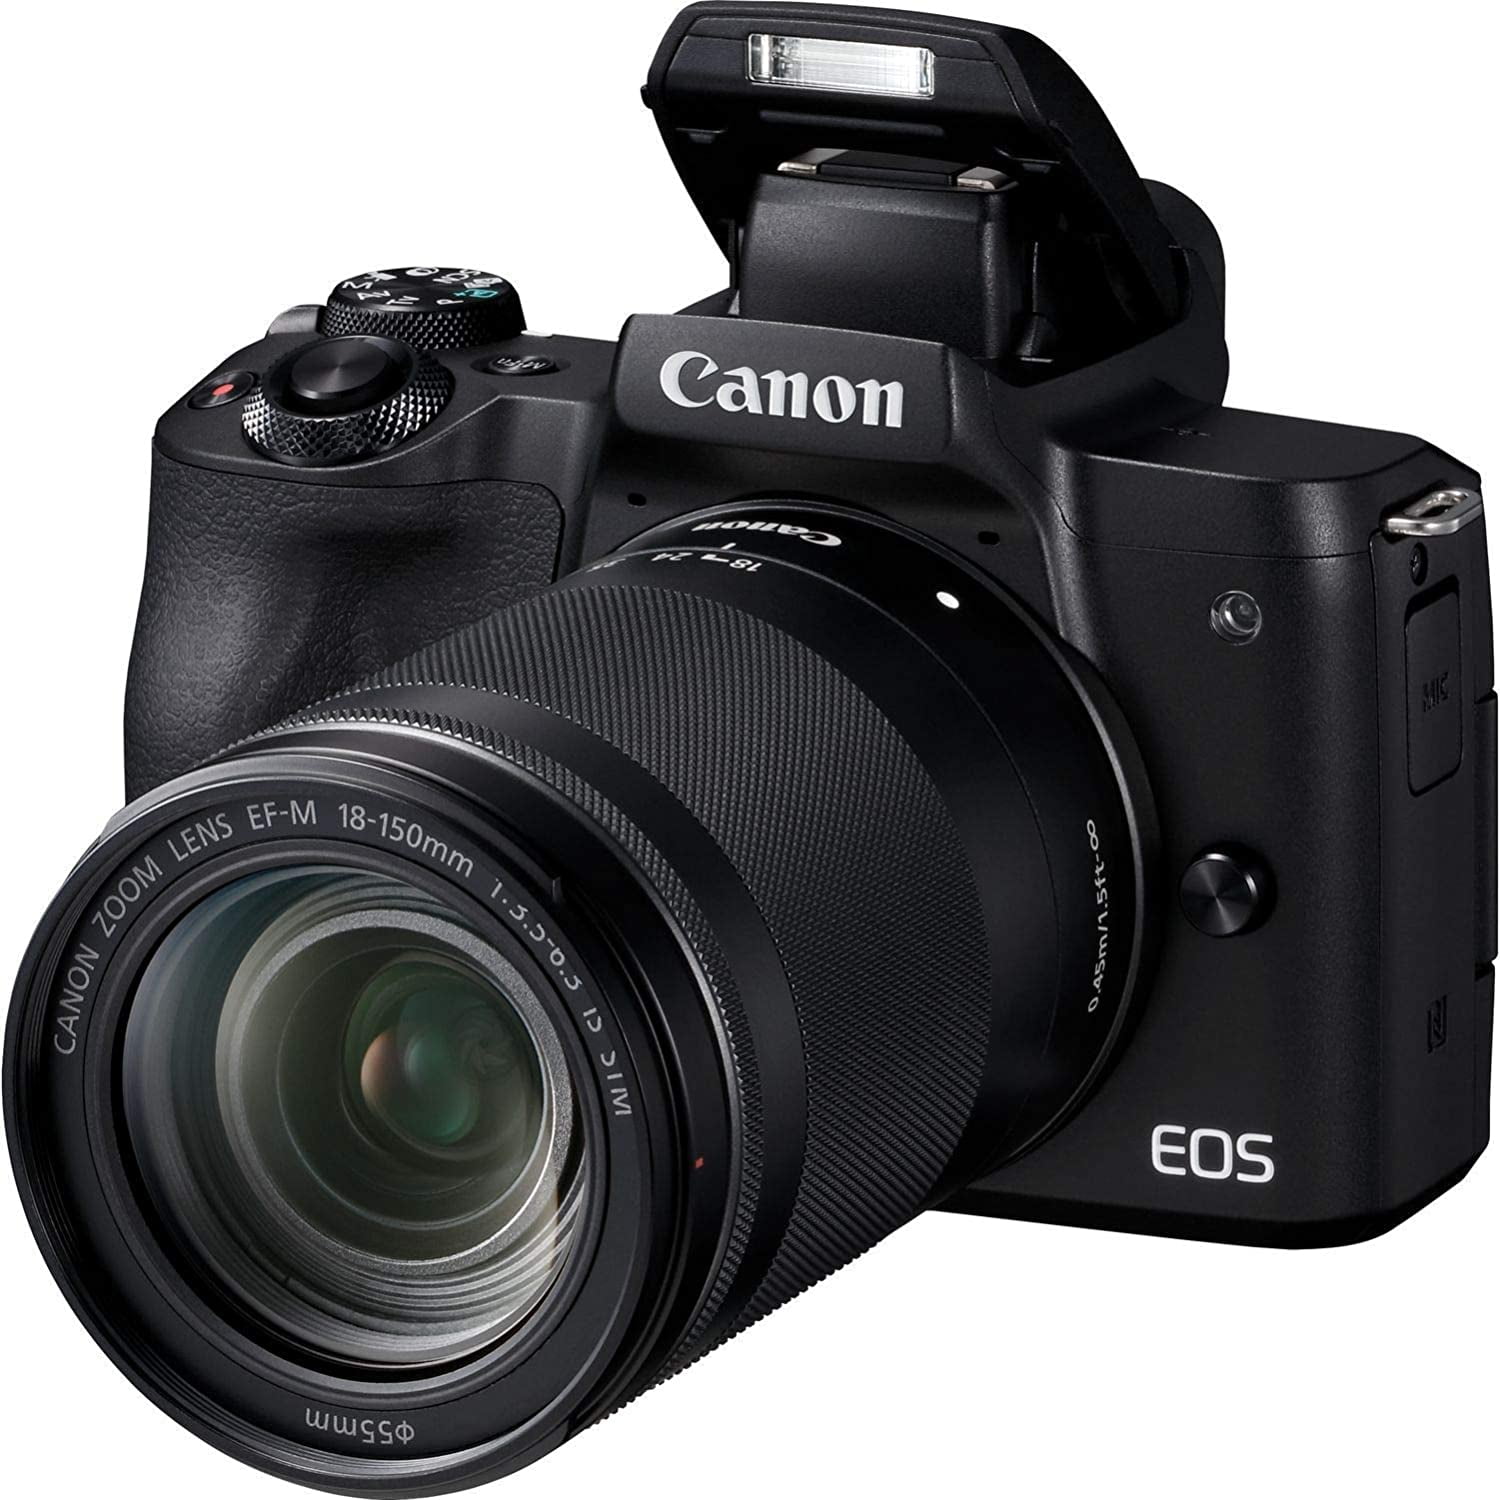 Canon EOS M50 Mark II Camera With EF-M 18-150mm IS STM Lens (4728C001) + 64GB Memory Card + Color Filter Kit + Filter Kit + 2 x Battery + External